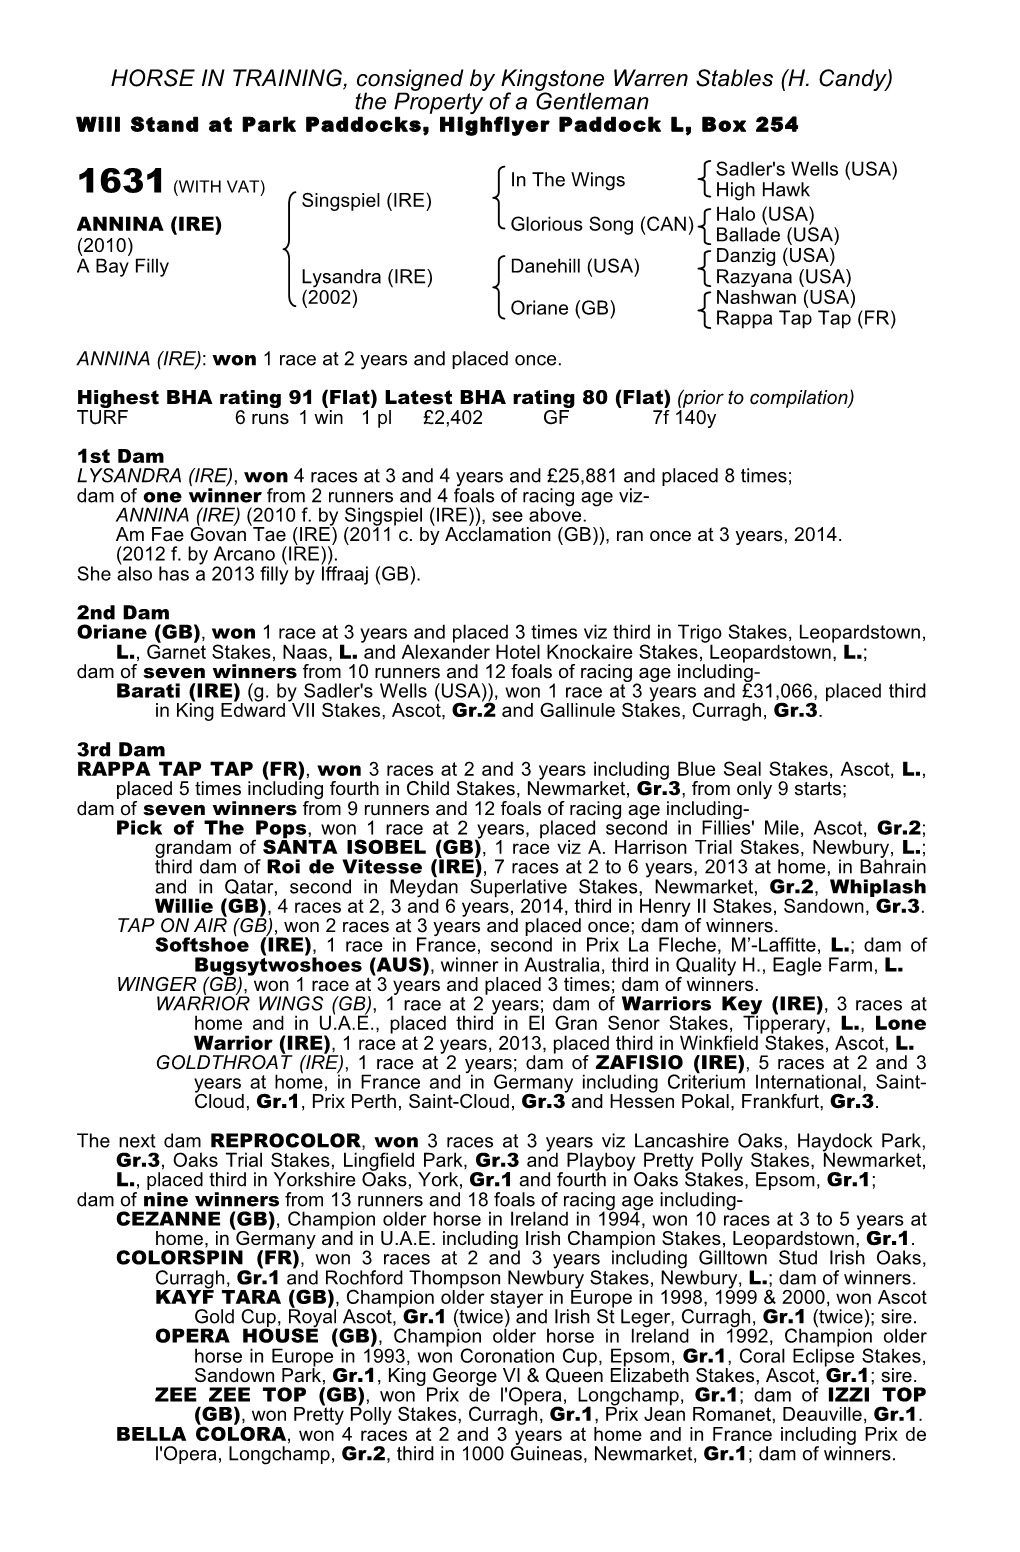 HORSE in TRAINING, Consigned by Kingstone Warren Stables (H. Candy) the Property of a Gentleman Will Stand at Park Paddocks, Highflyer Paddock L, Box 254